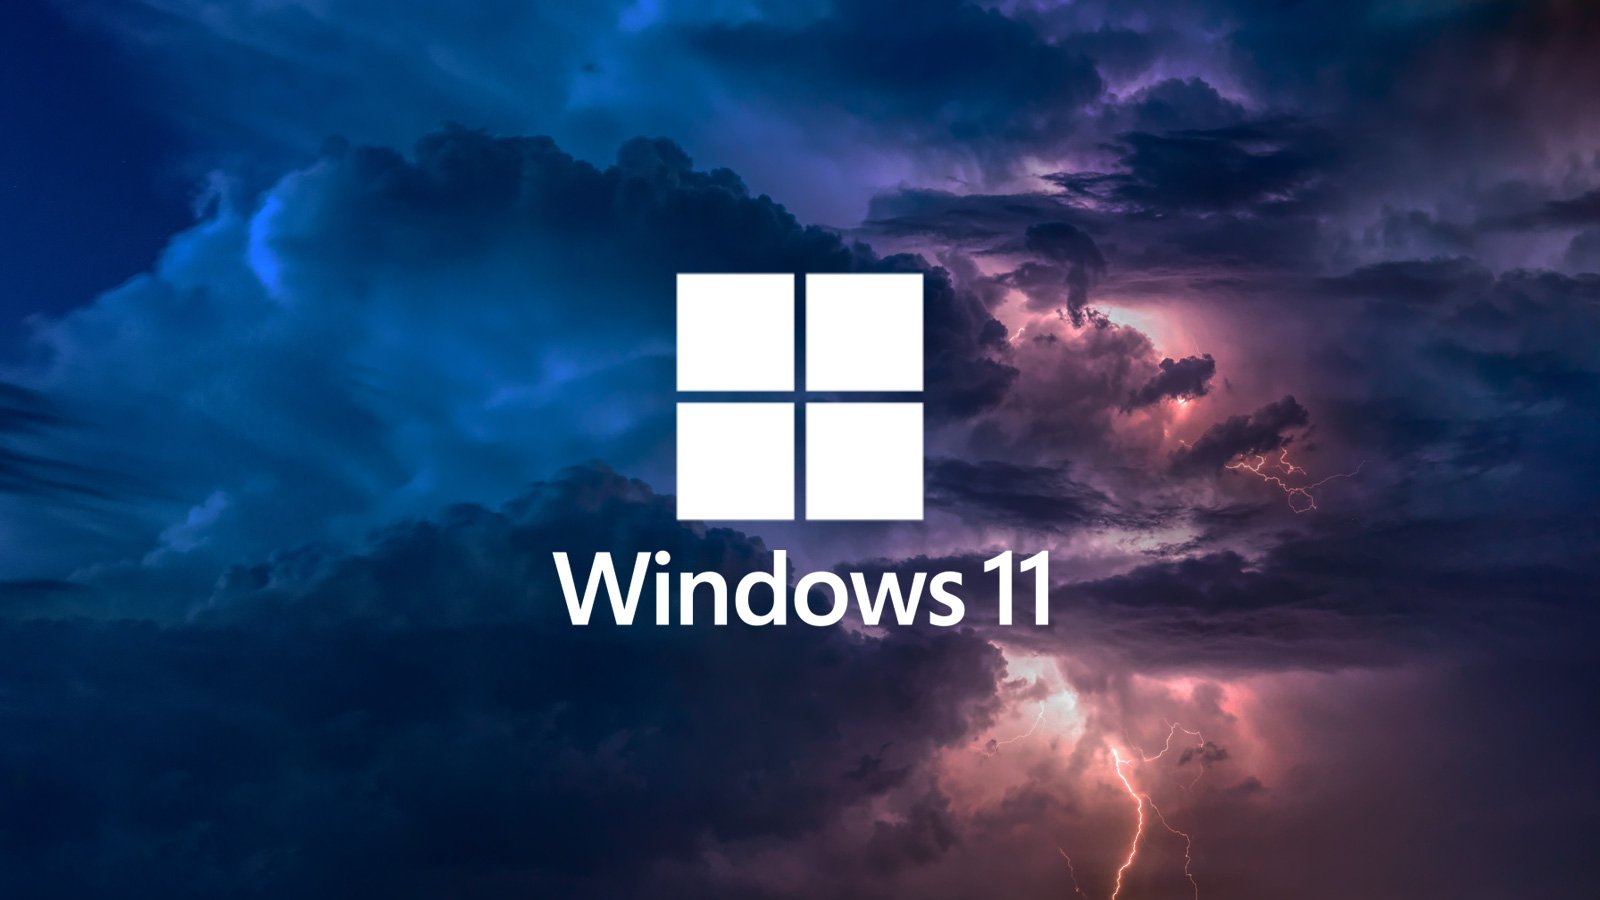 Windows 11 22H2 blocked on some systems due to printer issues